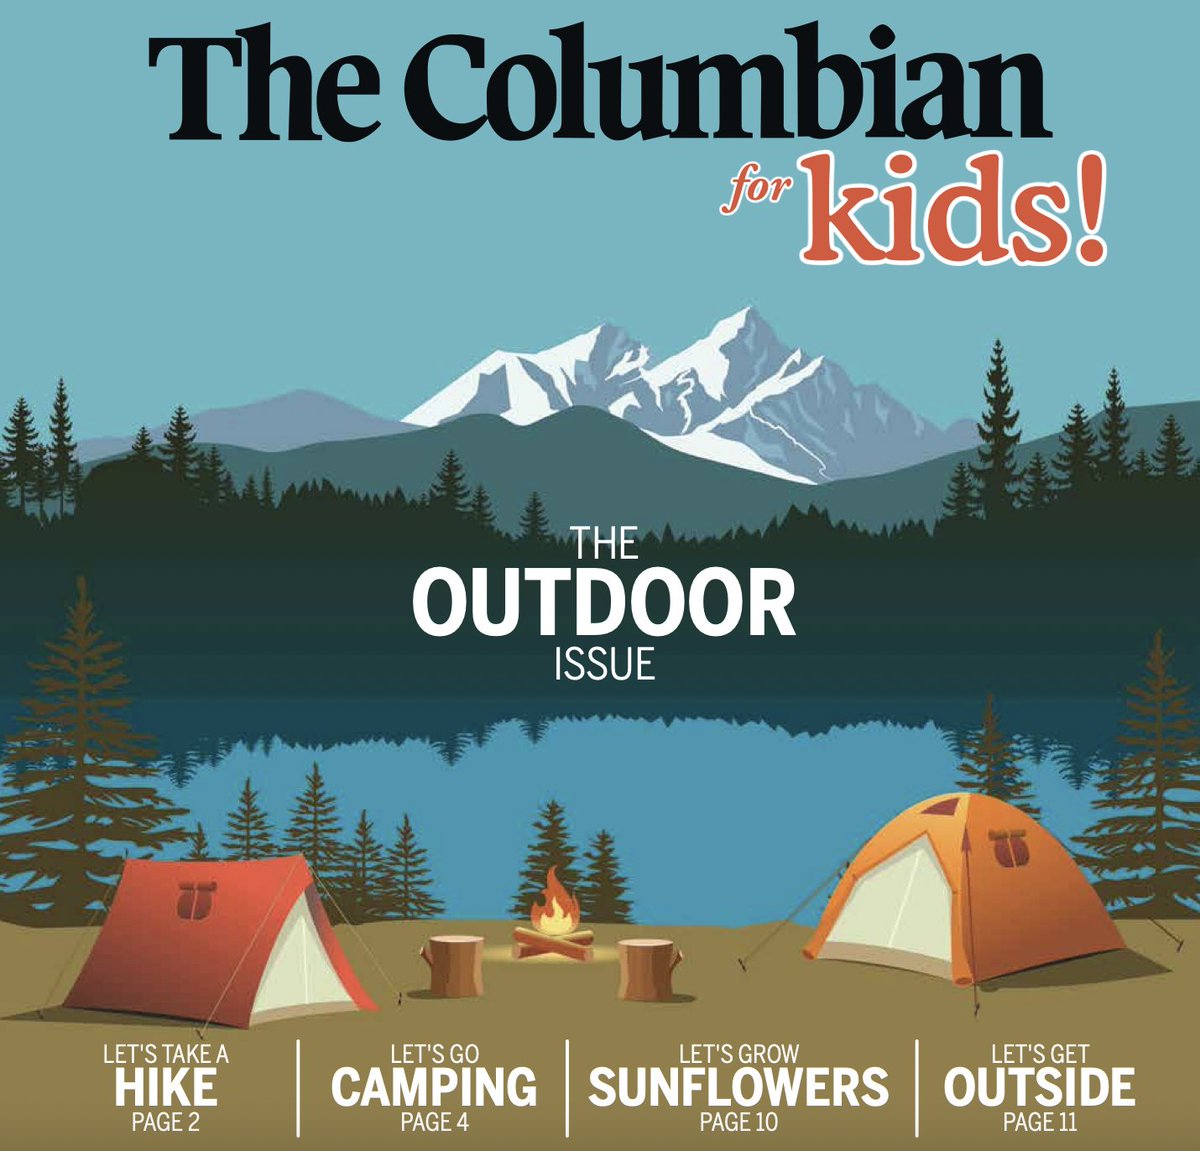 Giant Island is featured in The Columbian for Kids' April issue! It's featured in their Outdoor Book Spotlight and is a prize for their drawing contest: columbian.com/special-sectio… @IPGbooknews @JaneYolen @DouglasKeith @thecolumbian #outdoors #OutdoorAdventures #outdoorfun